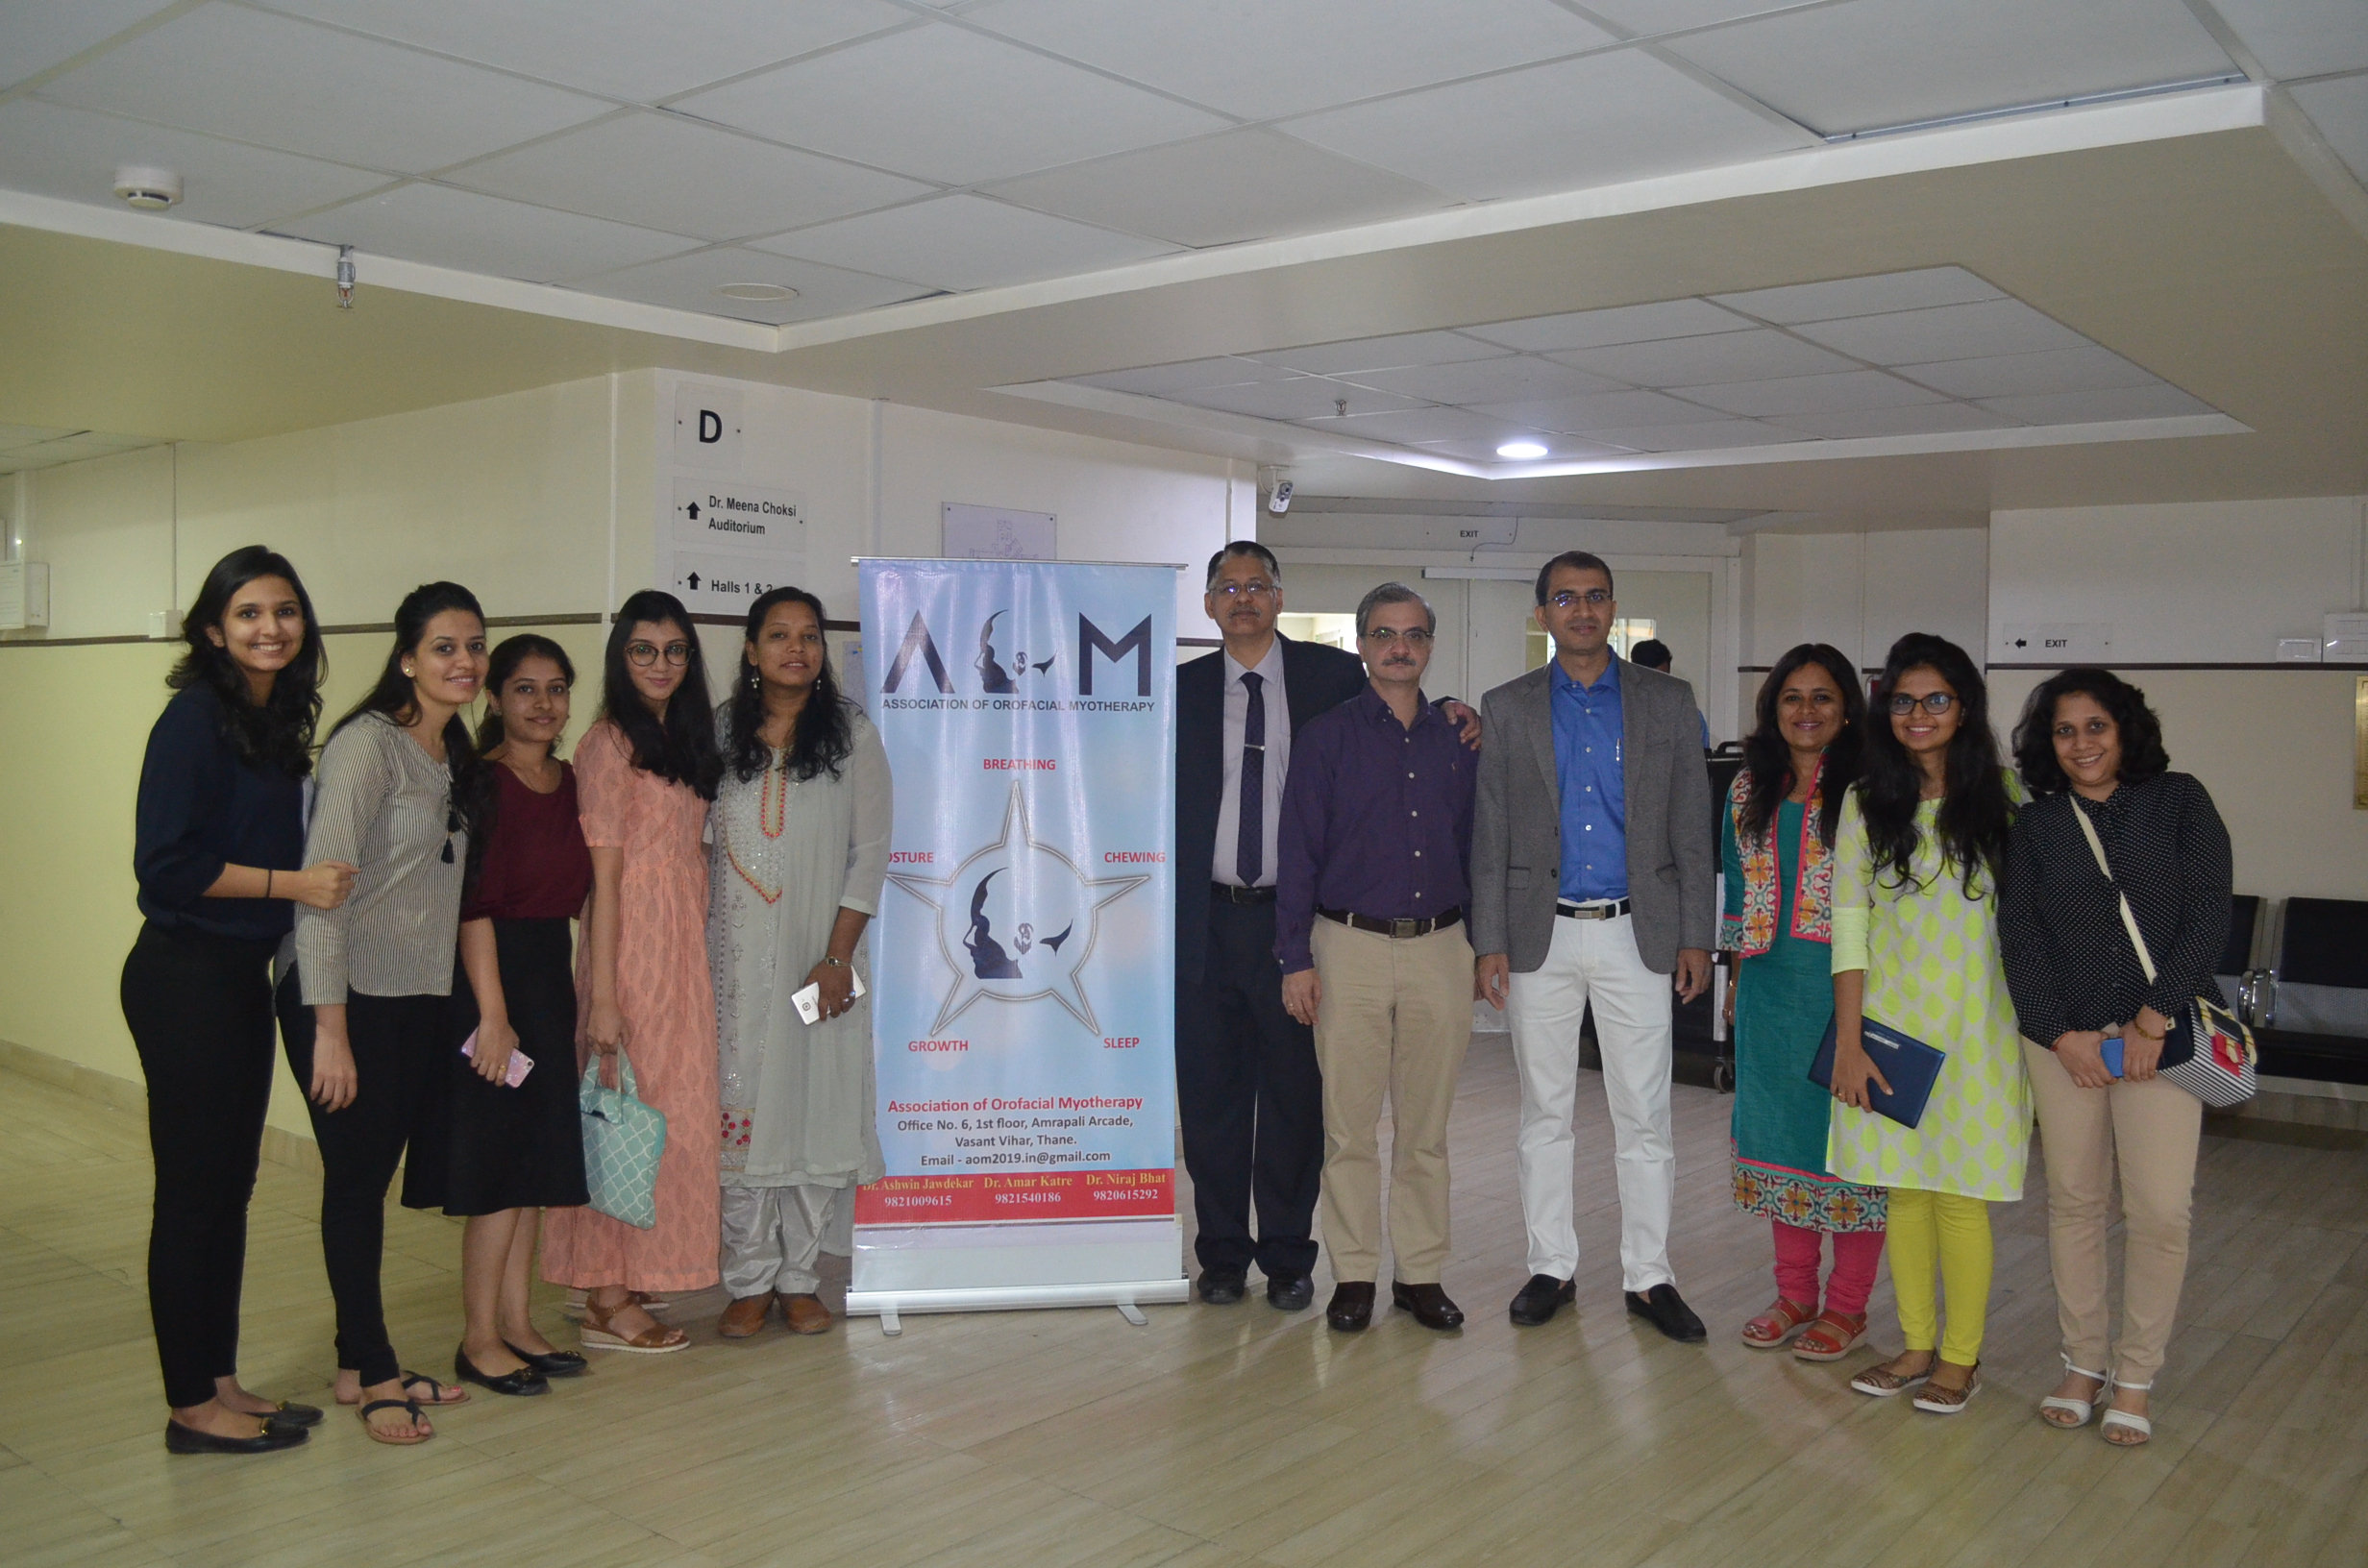 Past Event - Launch of the Foundation of Orofacial Myotherapy